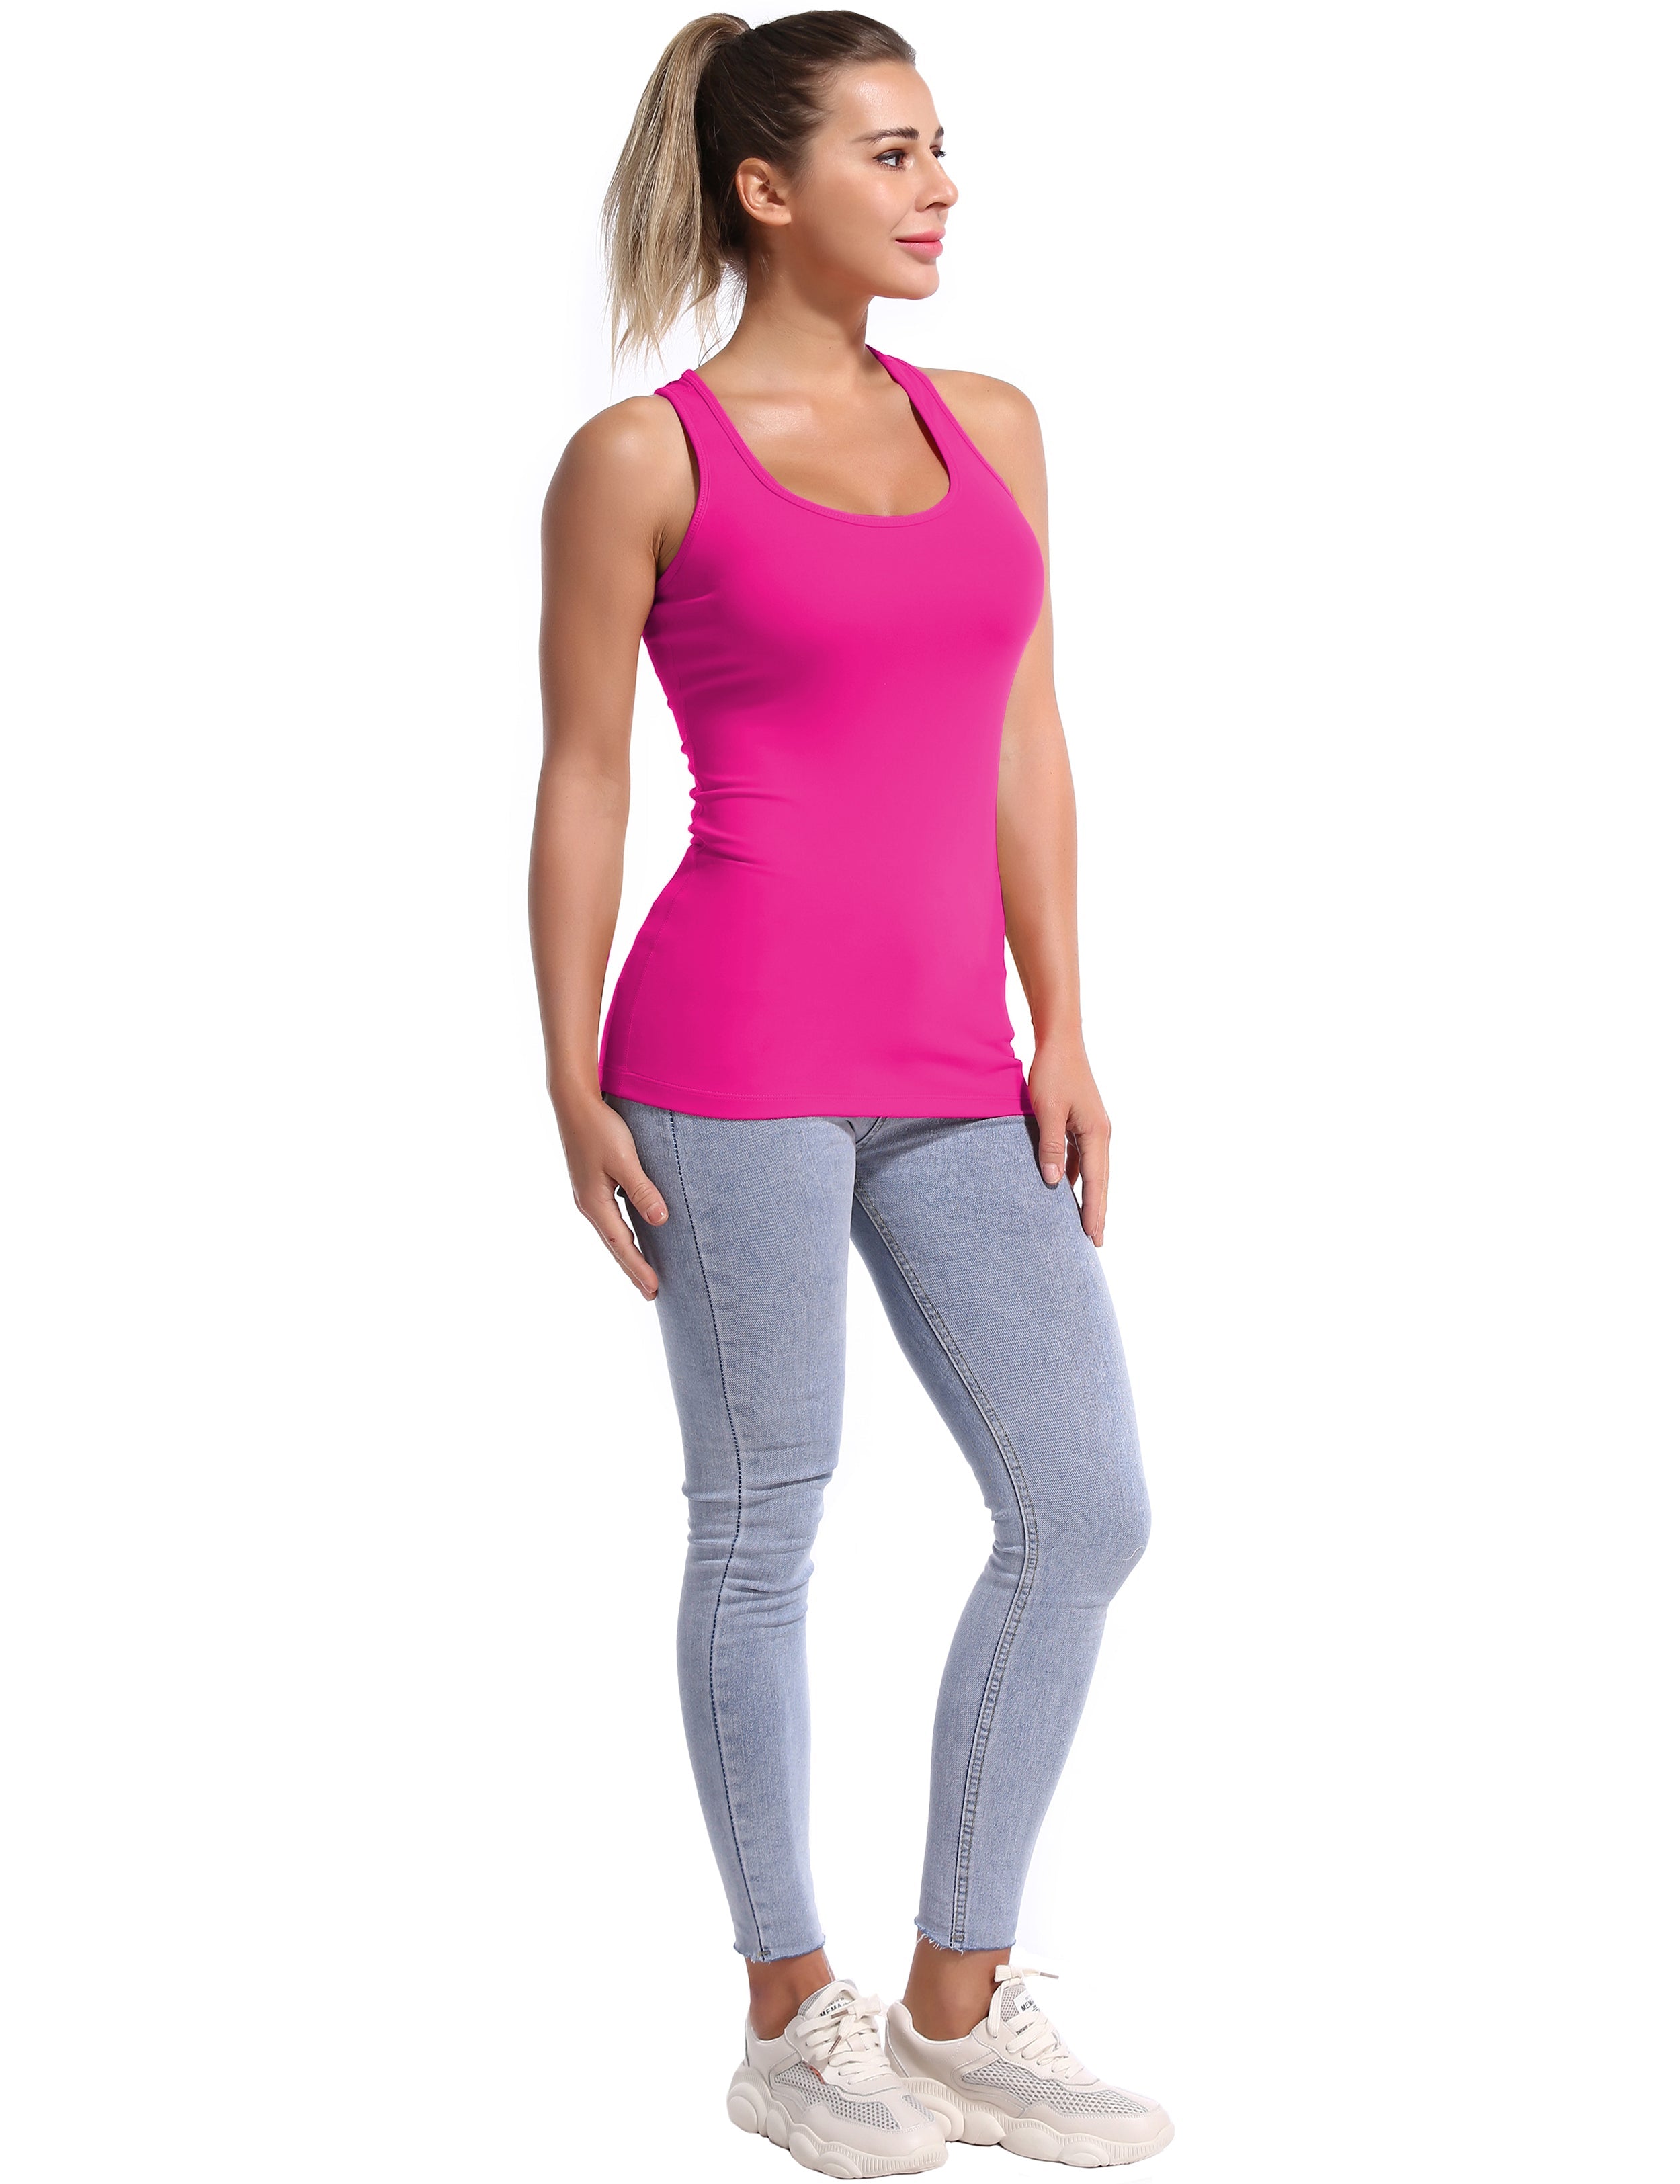 Racerback Athletic Tank Tops magenta 92%Nylon/8%Spandex(Cotton Soft) Designed for Golf Tight Fit So buttery soft, it feels weightless Sweat-wicking Four-way stretch Breathable Contours your body Sits below the waistband for moderate, everyday coverage